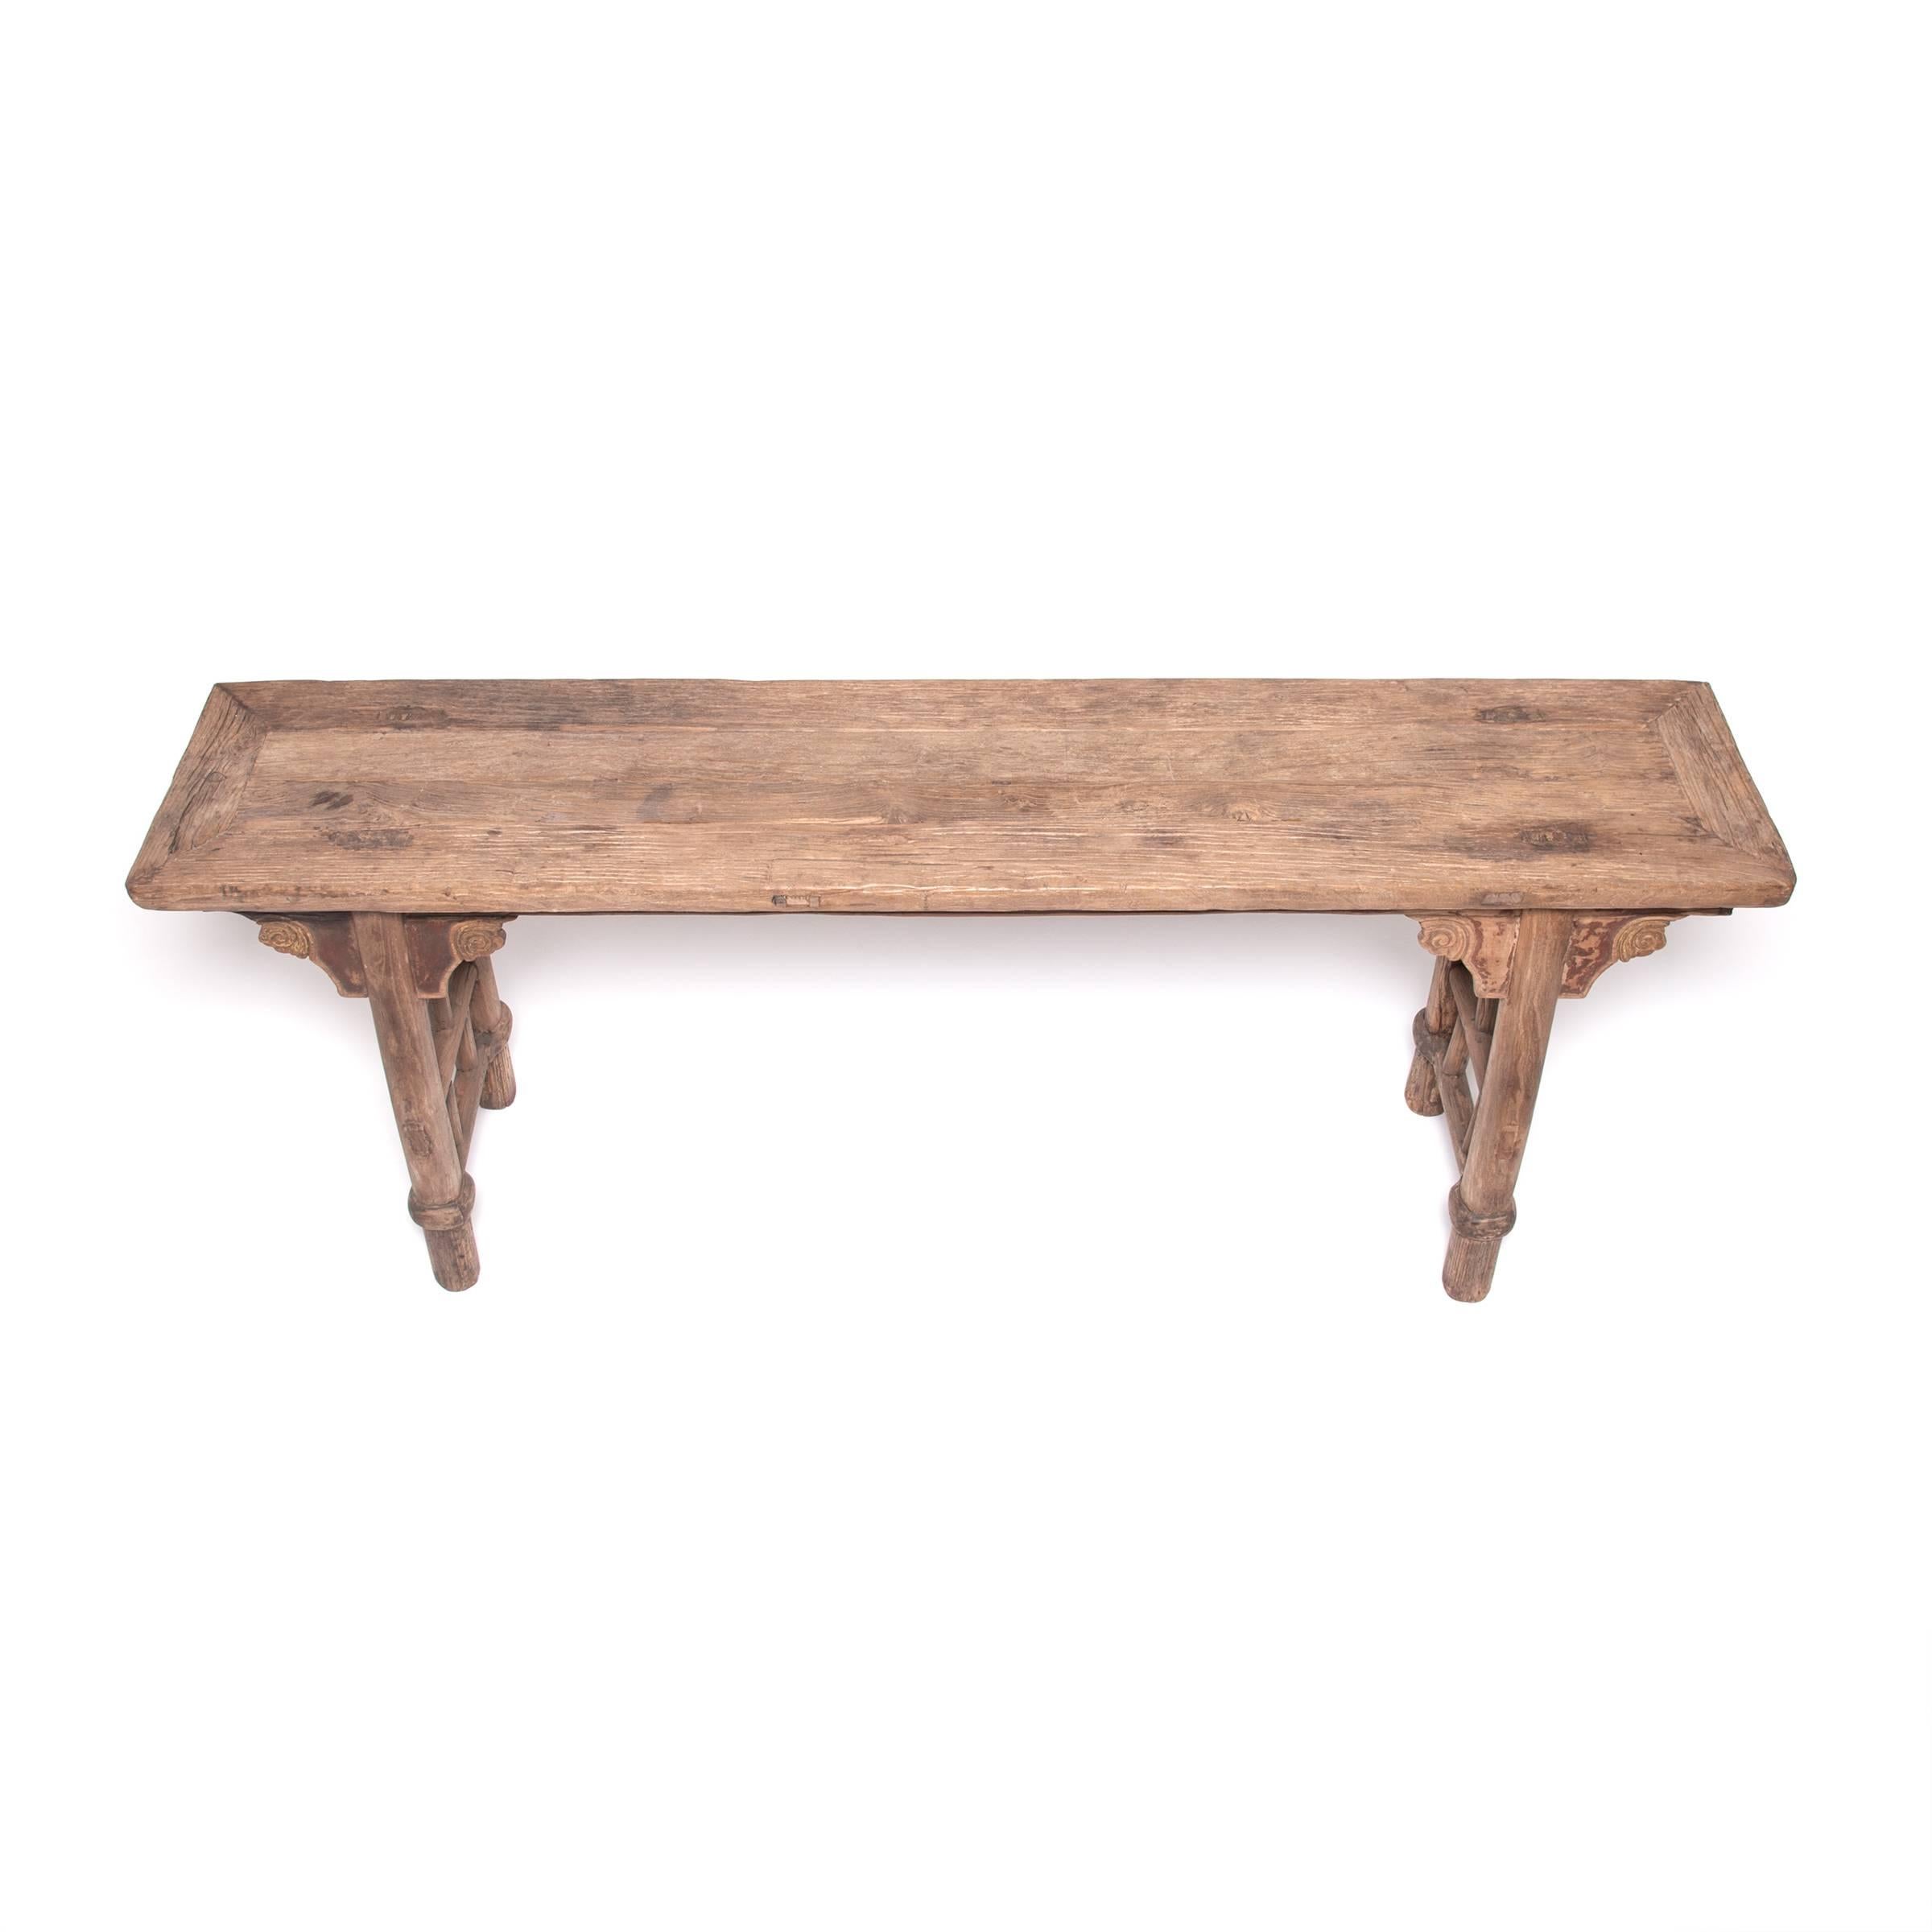 Elm Mid-19th Century Chinese Provincial Altar Table